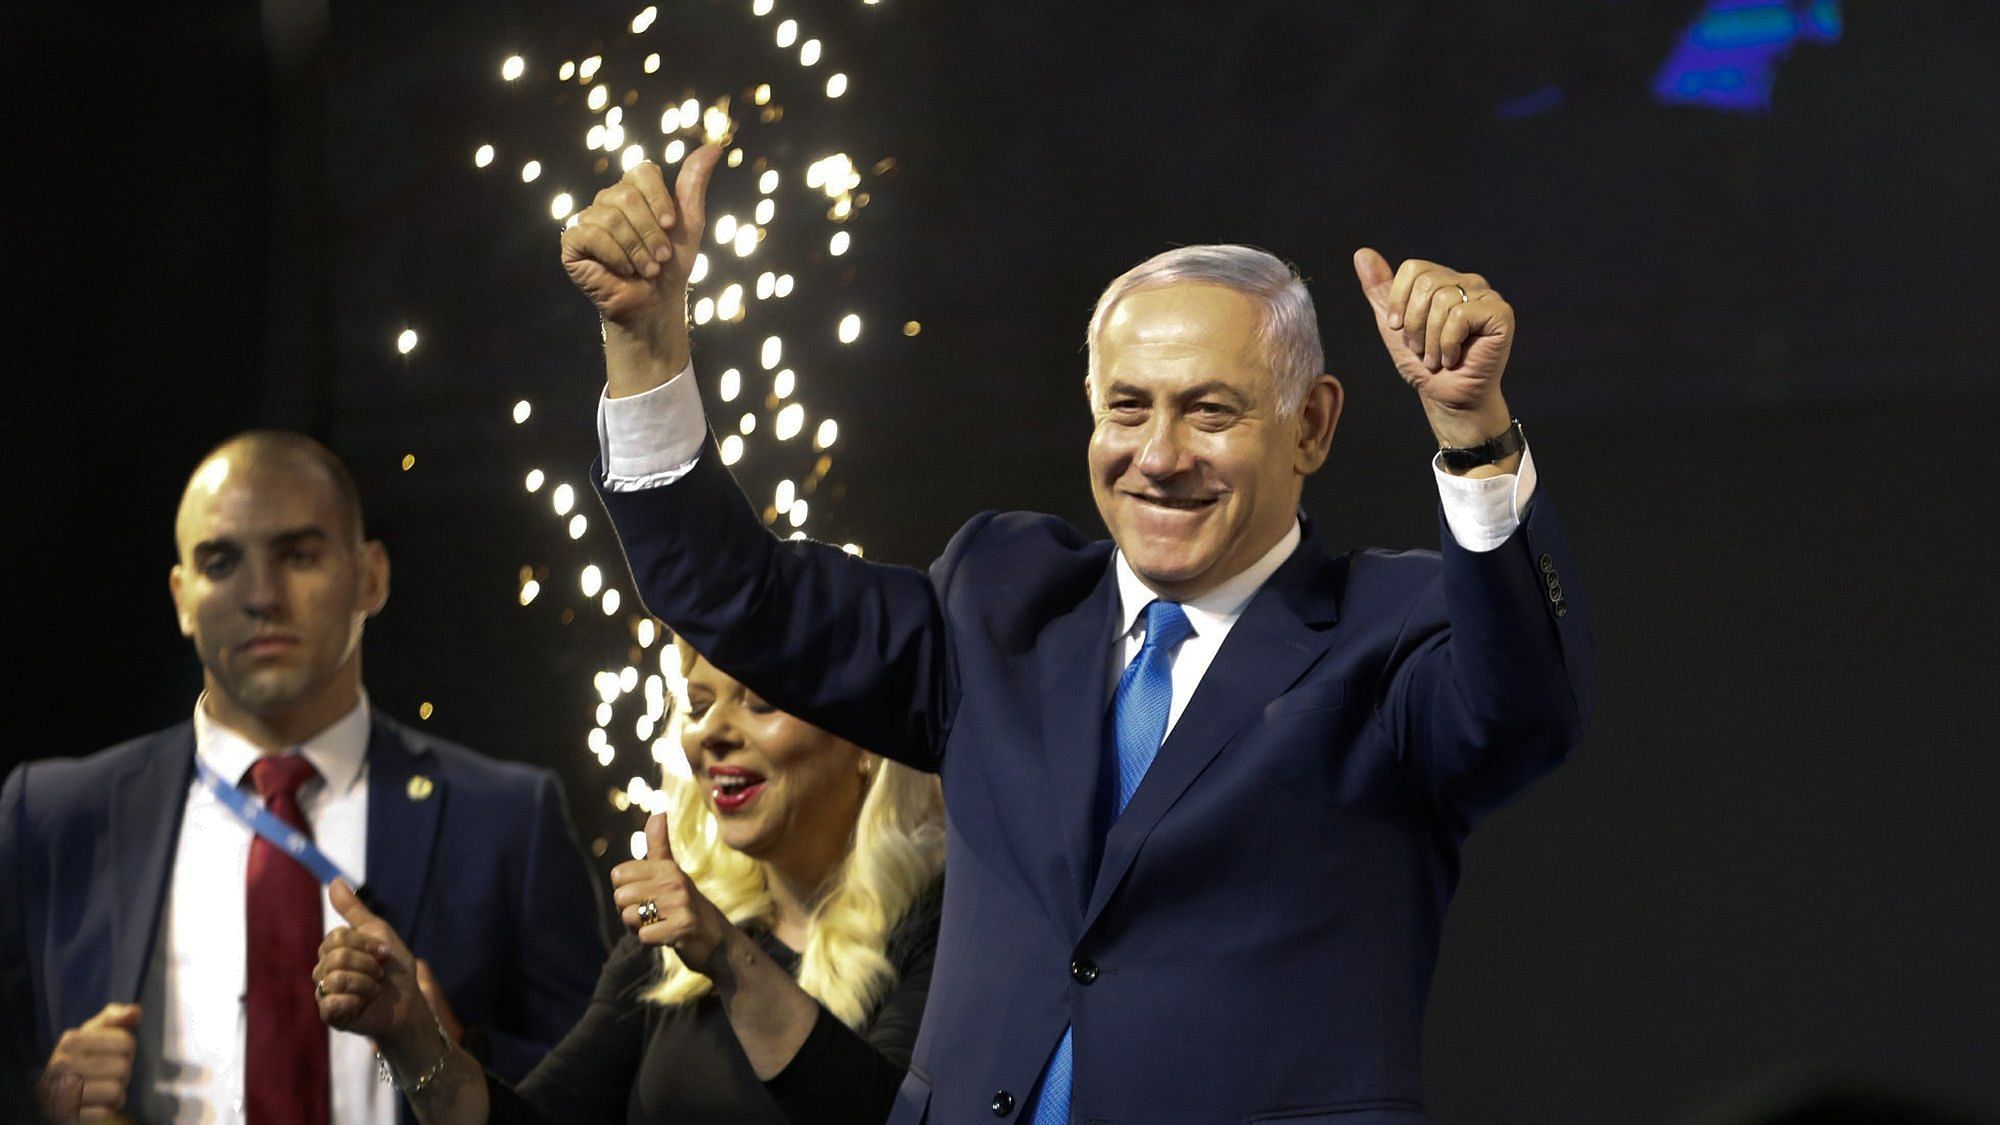 Israel’s Prime Minister Benjamin Netanyahu waves to his supporters after polls for Israel’s general elections closed in Tel Aviv.